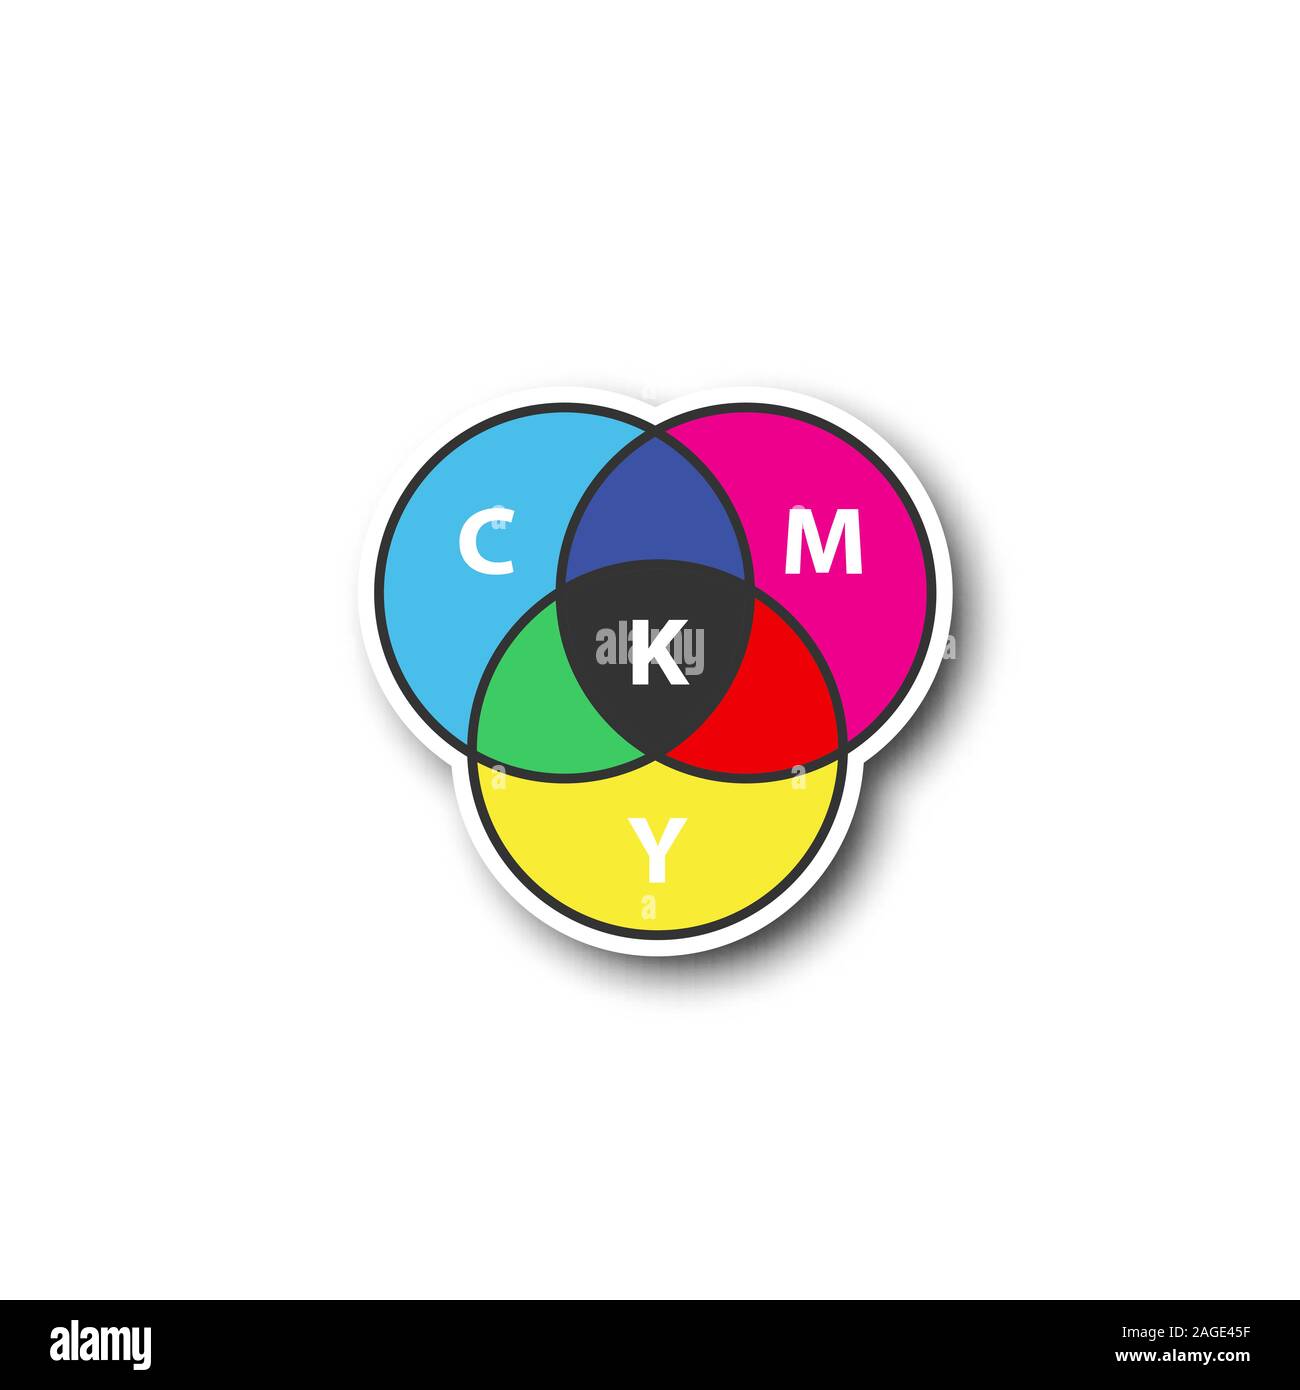 Cmyk color model patch. Cyan, magenta, yellow, key color scheme. Color sticker. Vector isolated illustration Stock Vector